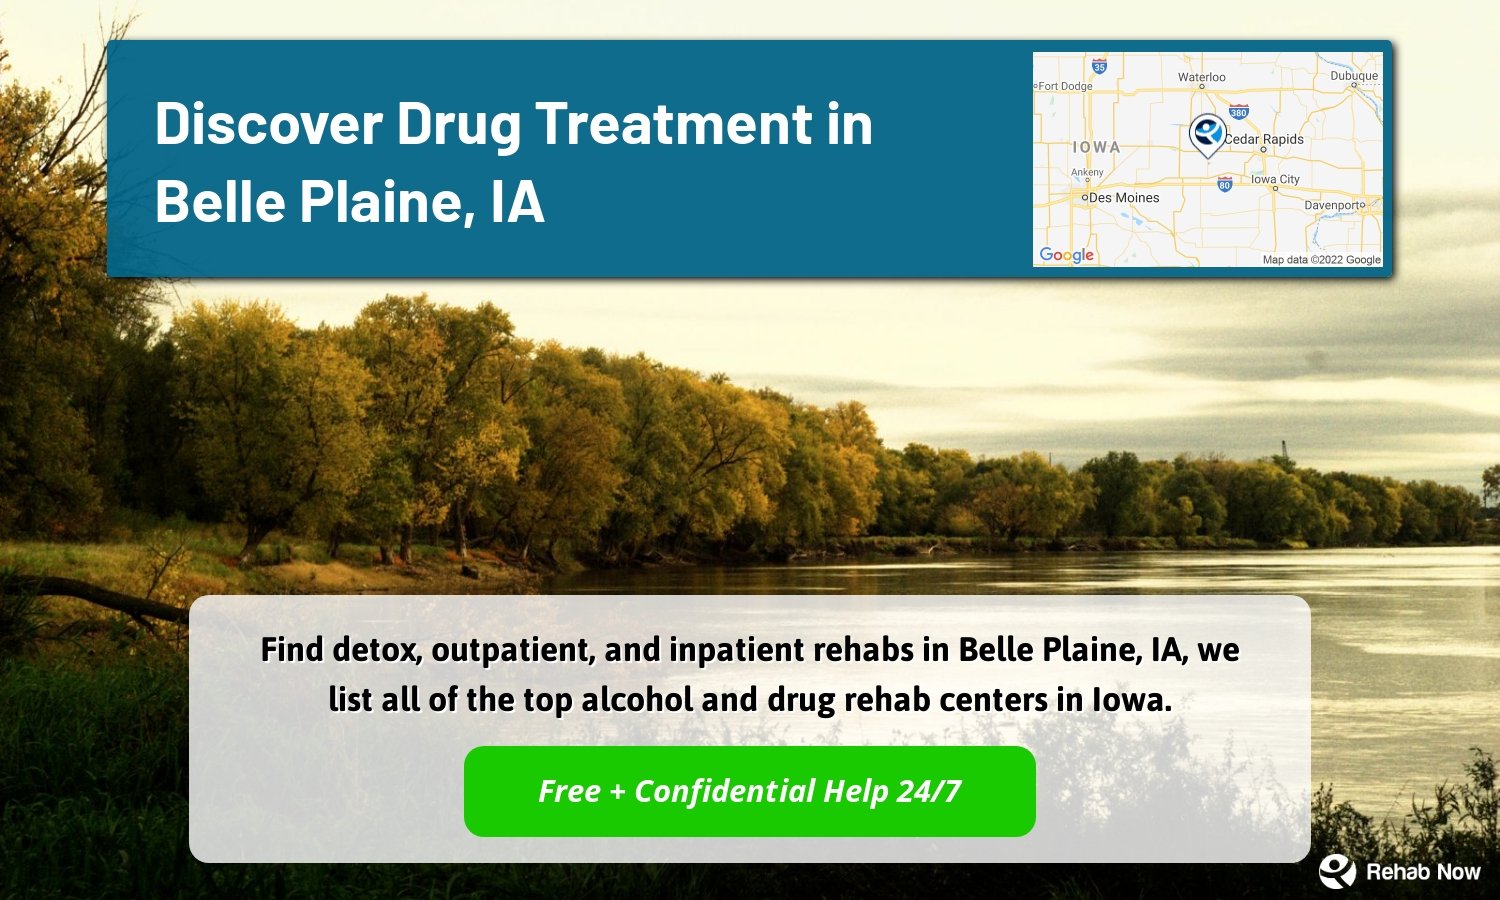 Find detox, outpatient, and inpatient rehabs in Belle Plaine, IA, we list all of the top alcohol and drug rehab centers in Iowa.